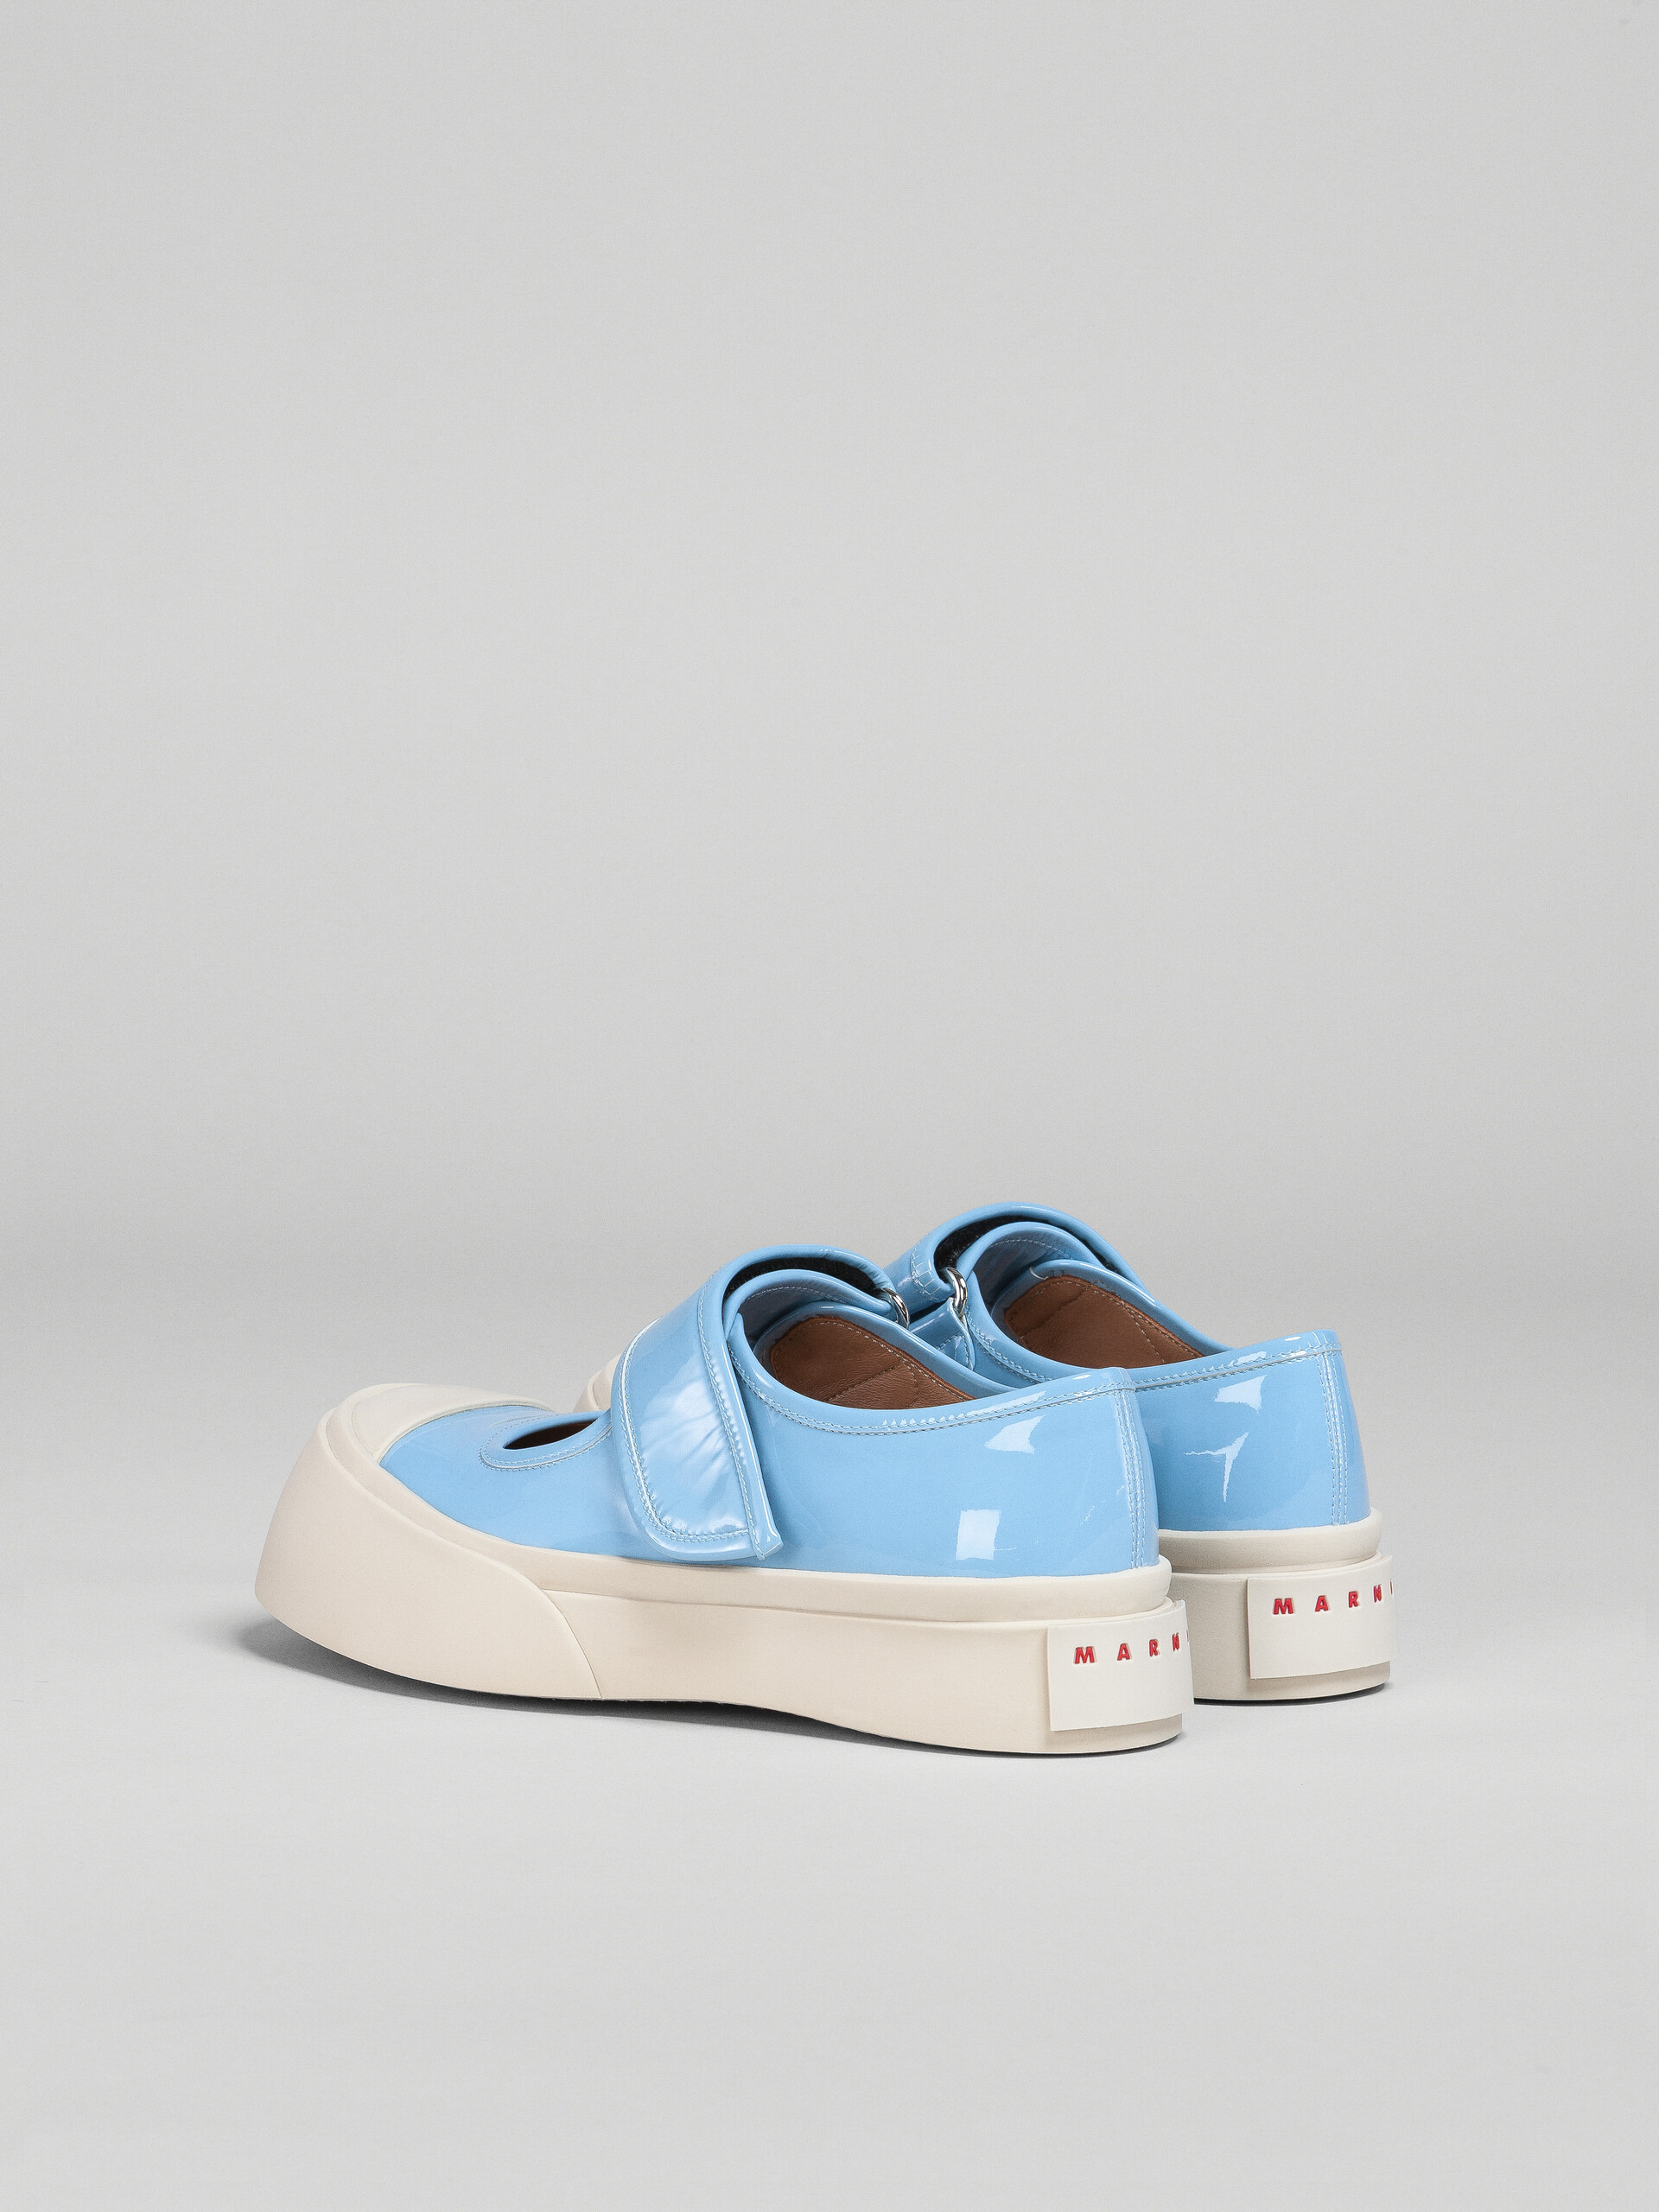 Pale blue patent leather PABLO Mary-Jane sneaker - Sneakers - Image 3